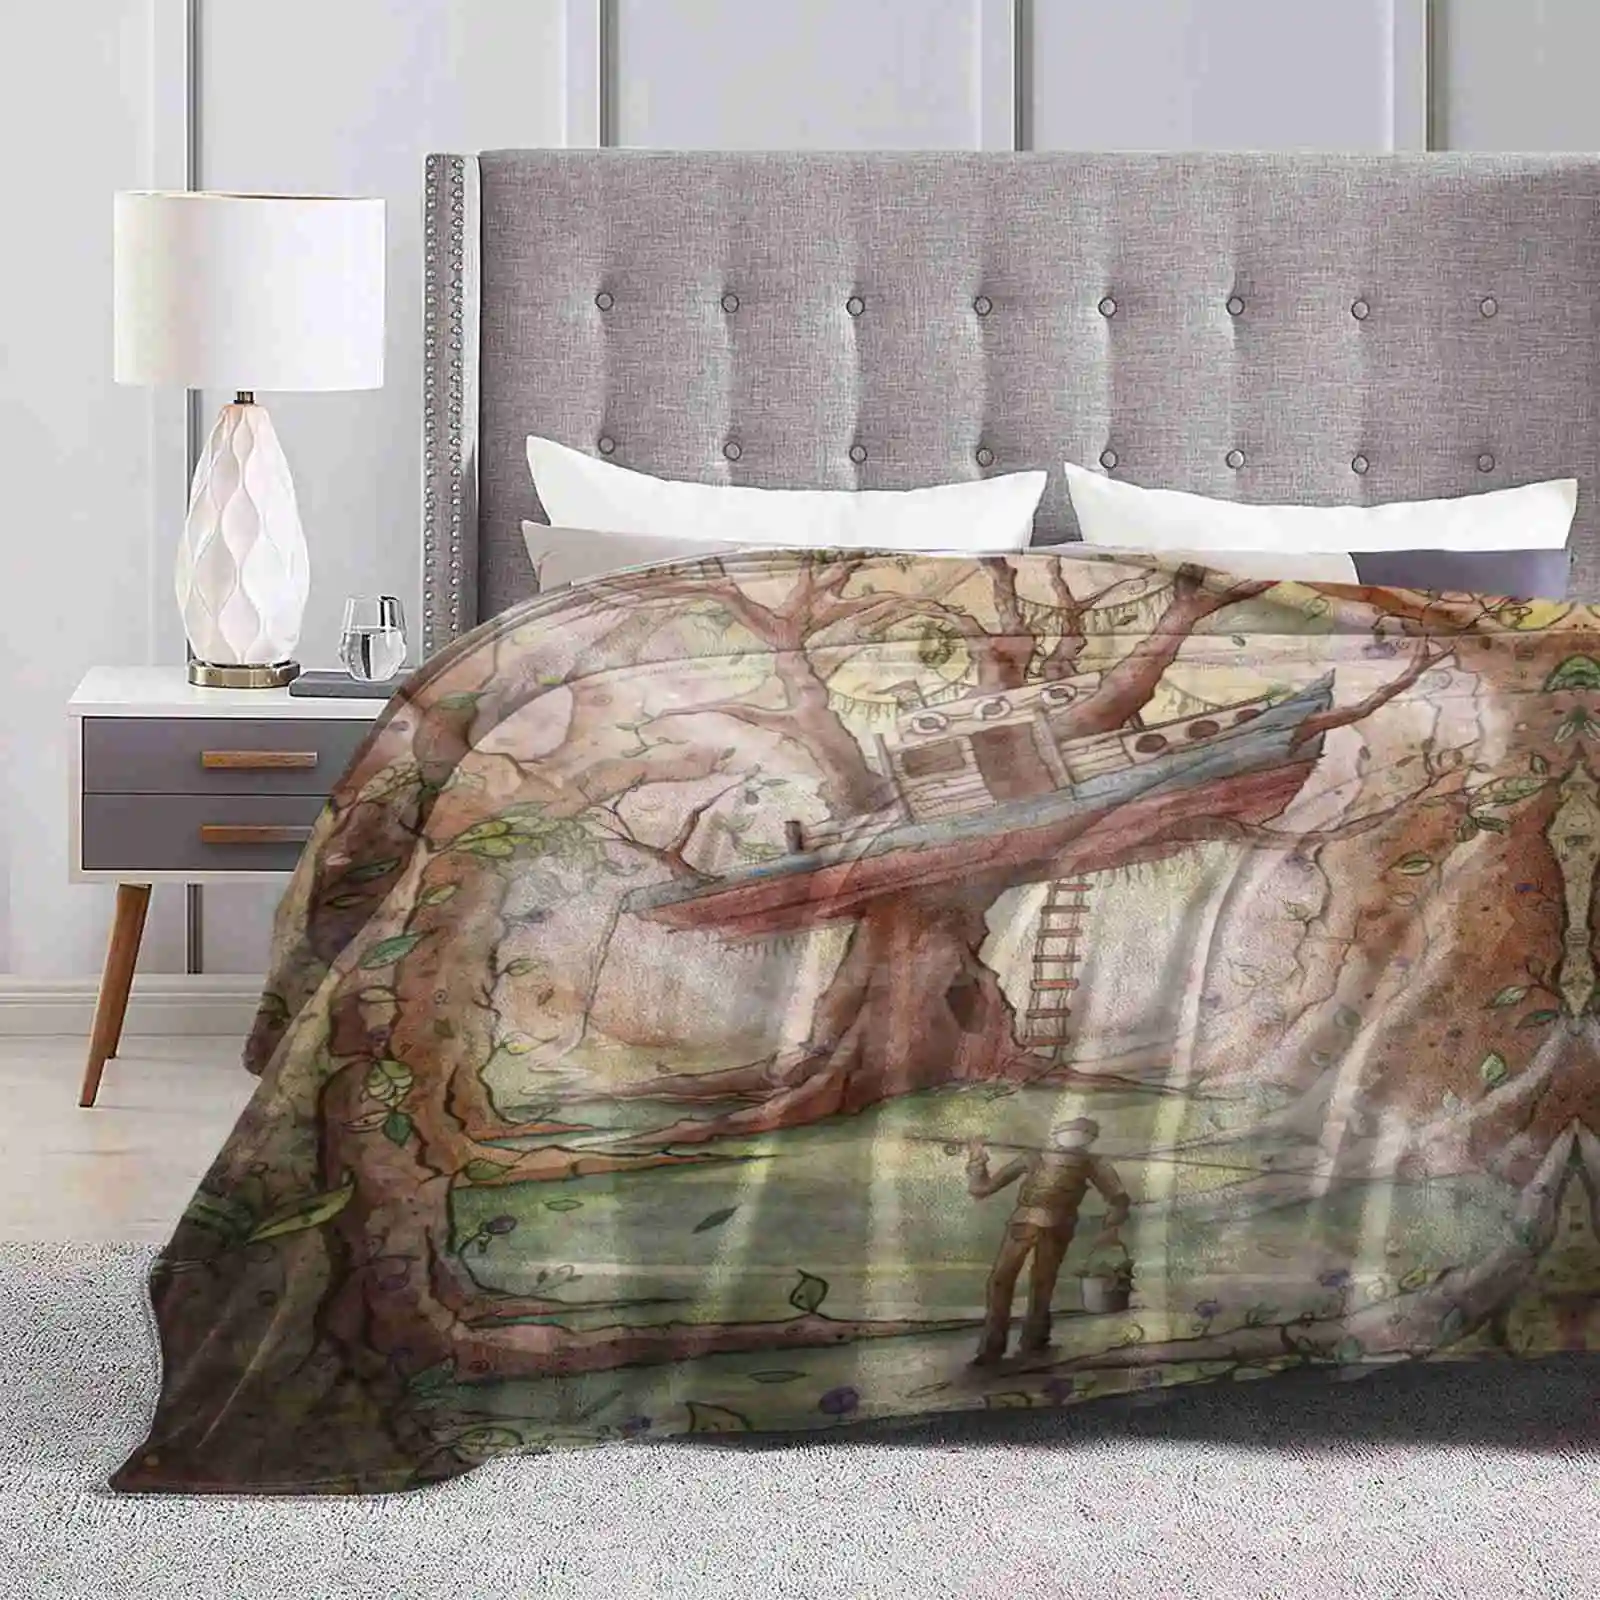 

Fisherman Of The Forest Super Warm Soft Blankets Throw On Sofa/Bed/Travel Fisherman Forest Trees Woods Leaves Wildlife Nature